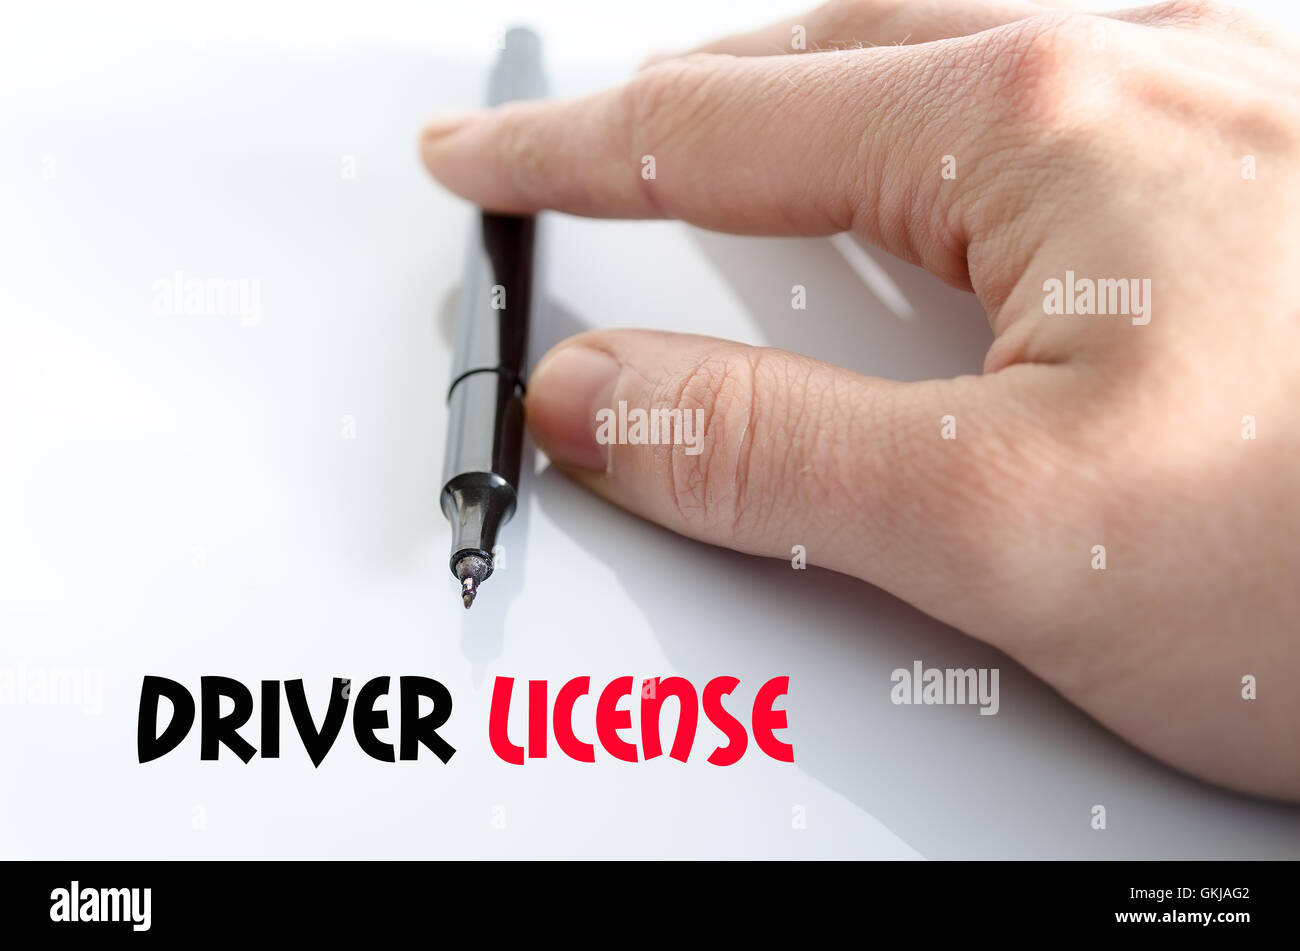 Driver license text concept isolated over white background Stock Photo